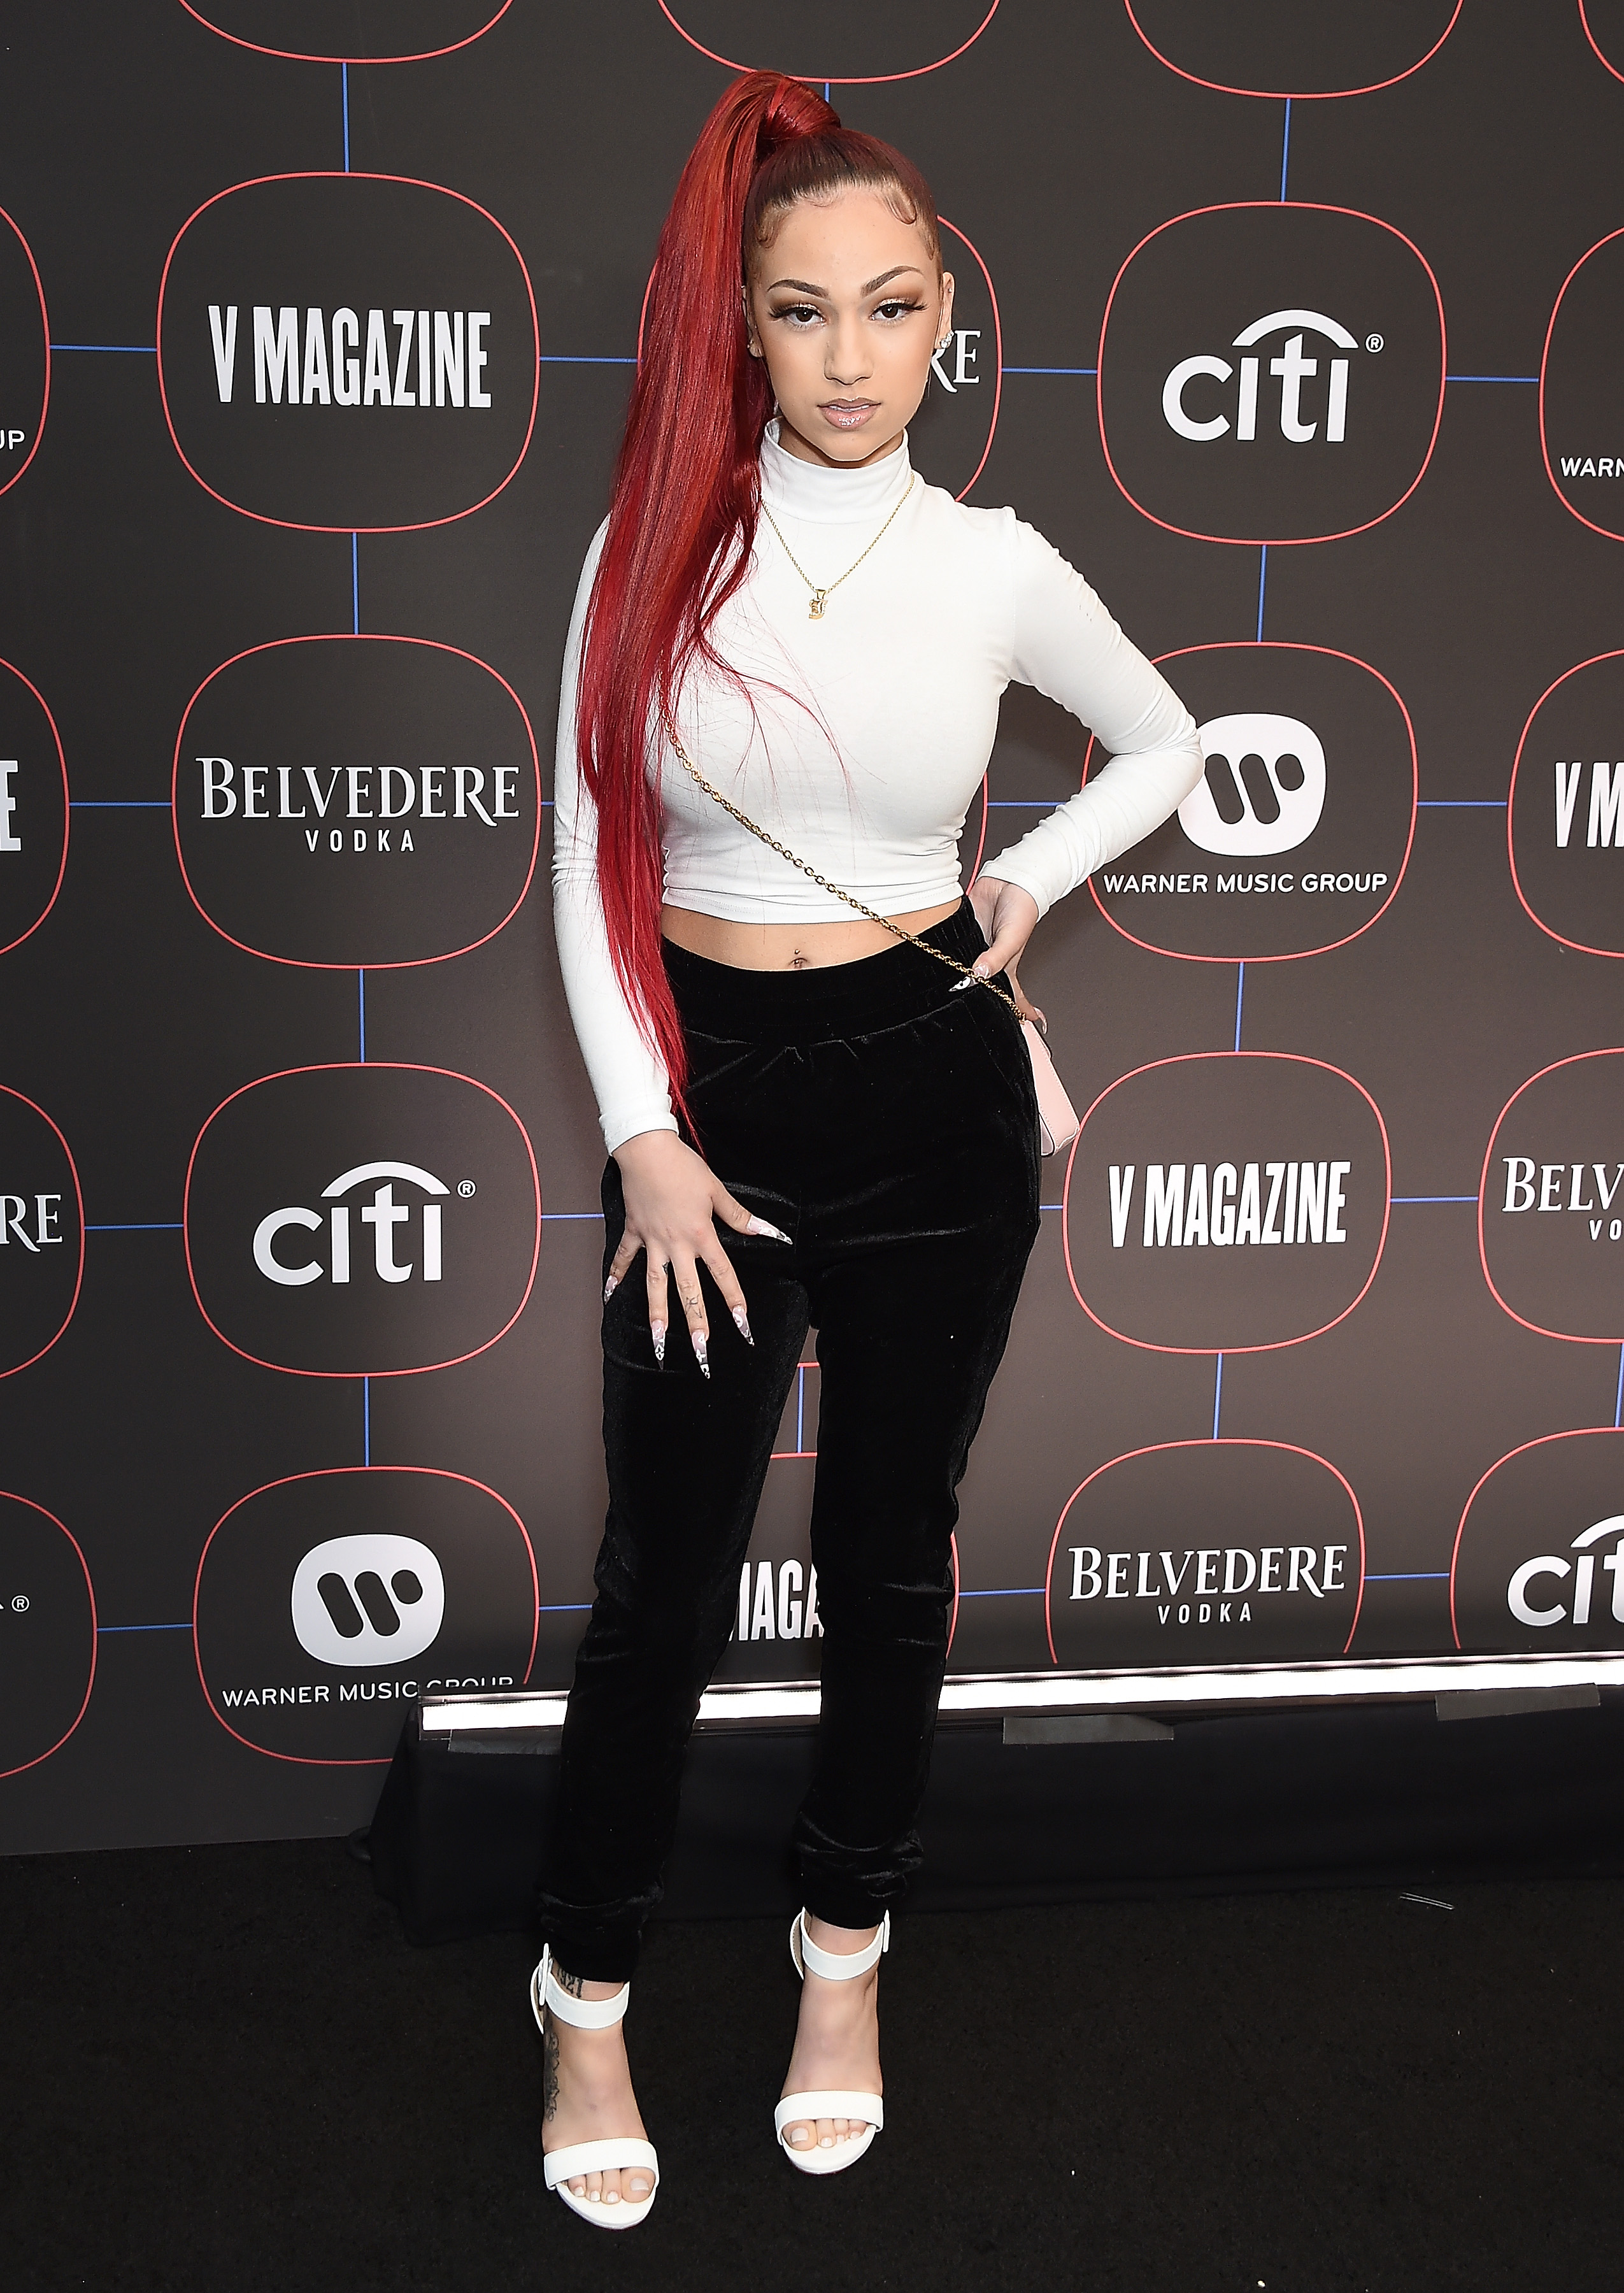 Bhad Bhabie Gets Beat Up By Woah Vicky; Fans Drag Both Parties